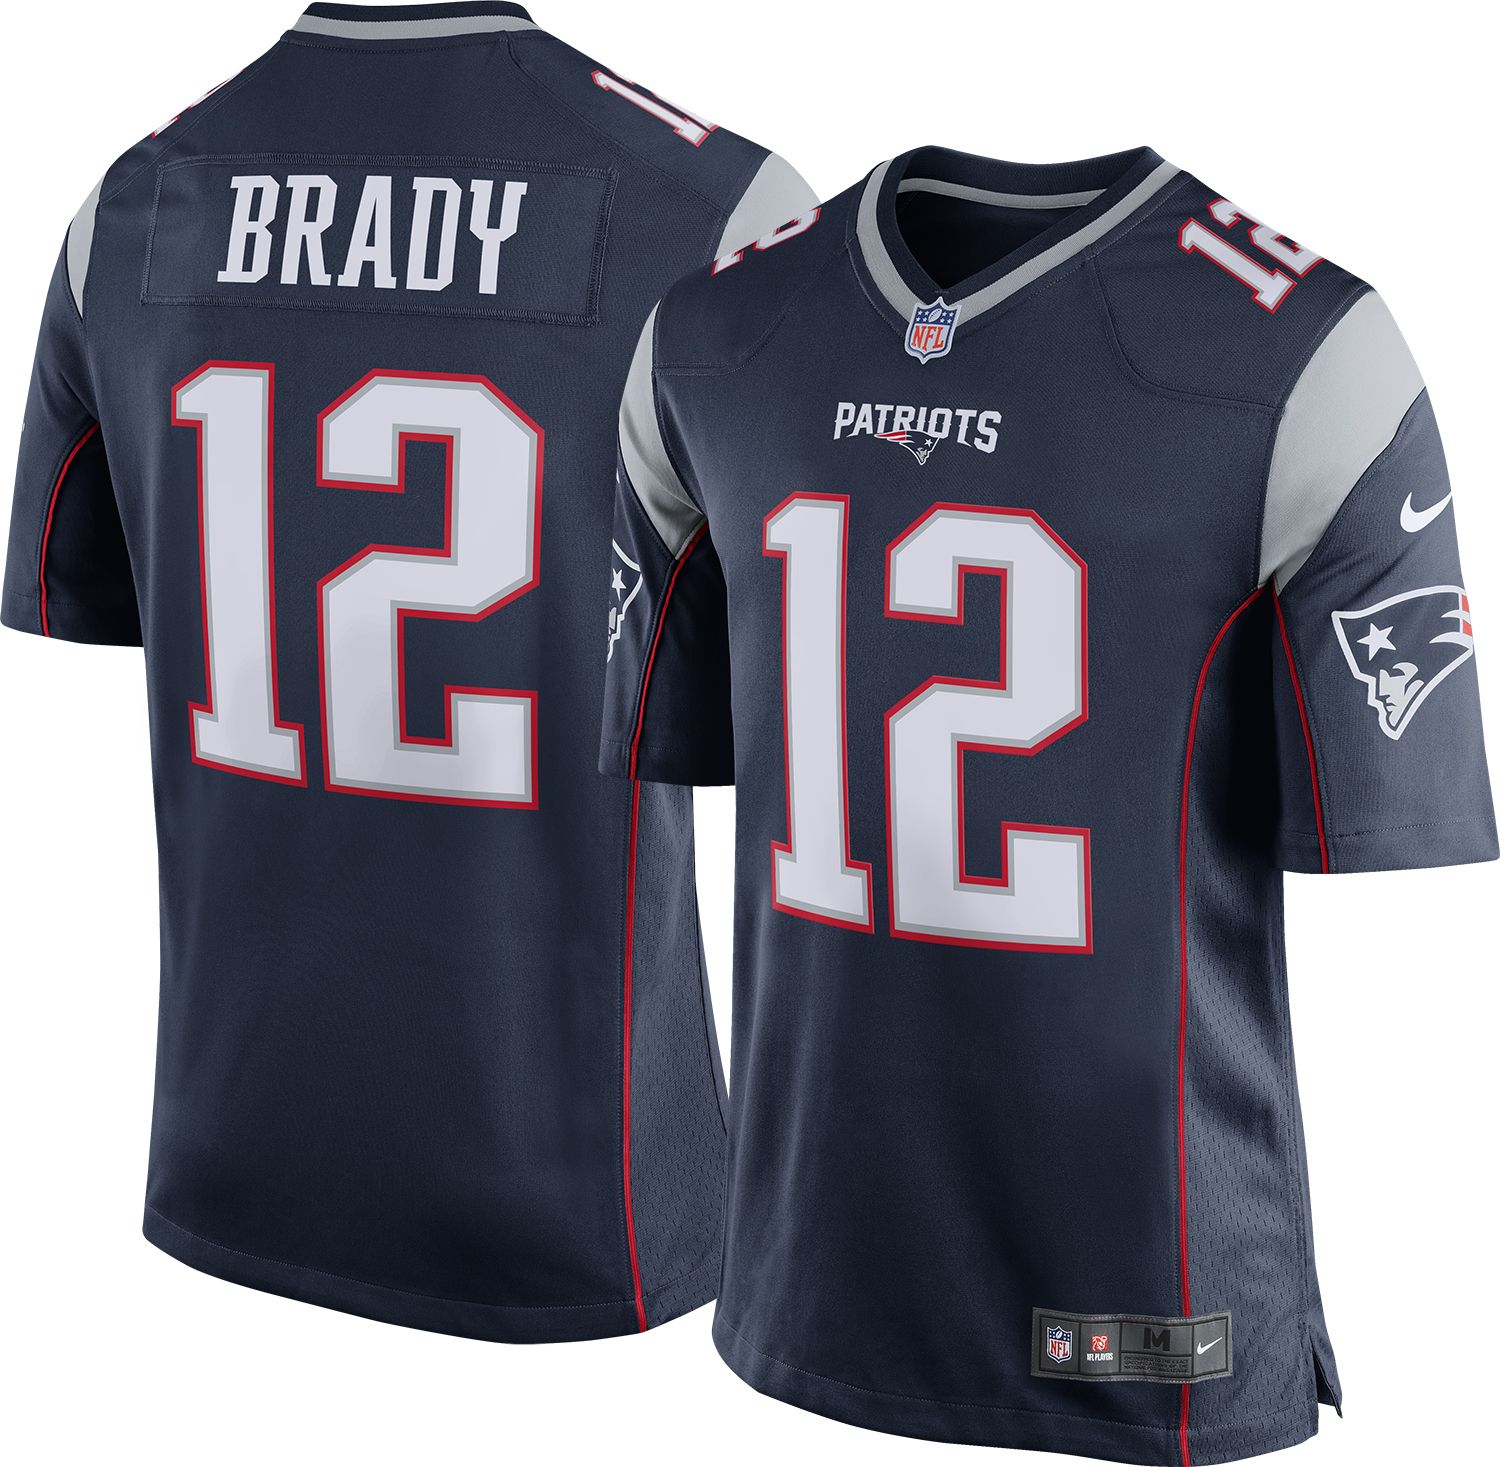 how many tom brady jerseys have been sold